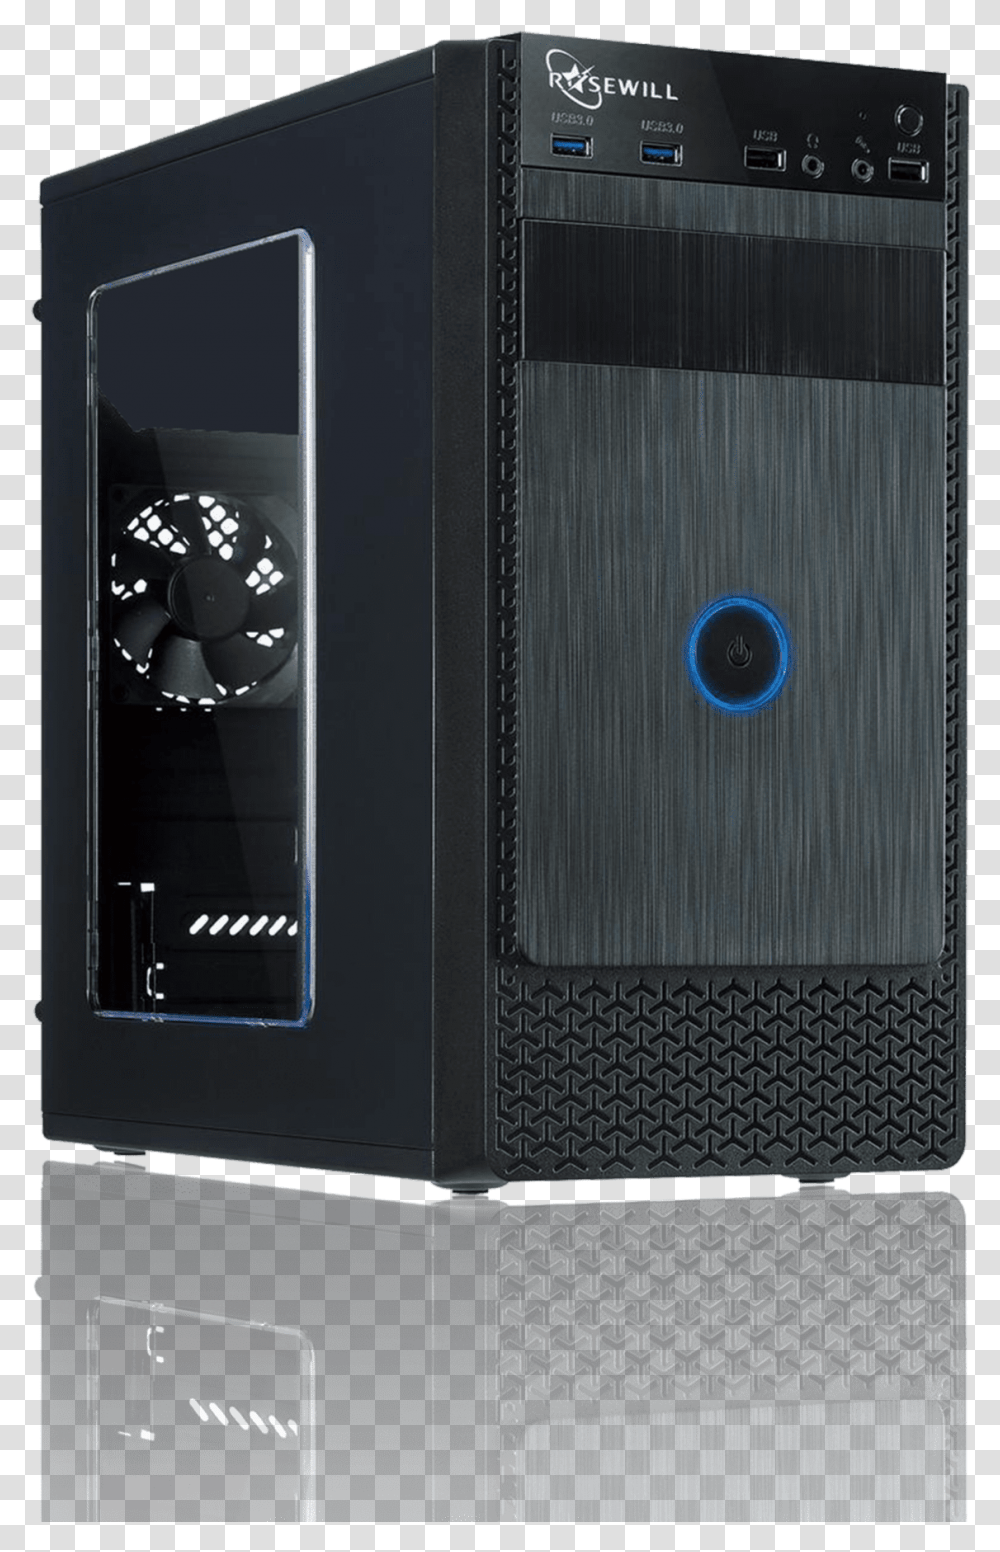 Rosewill Fbm X1 Microatx Mini Tower Case, Electronics, Mobile Phone, Cell Phone, Speaker Transparent Png